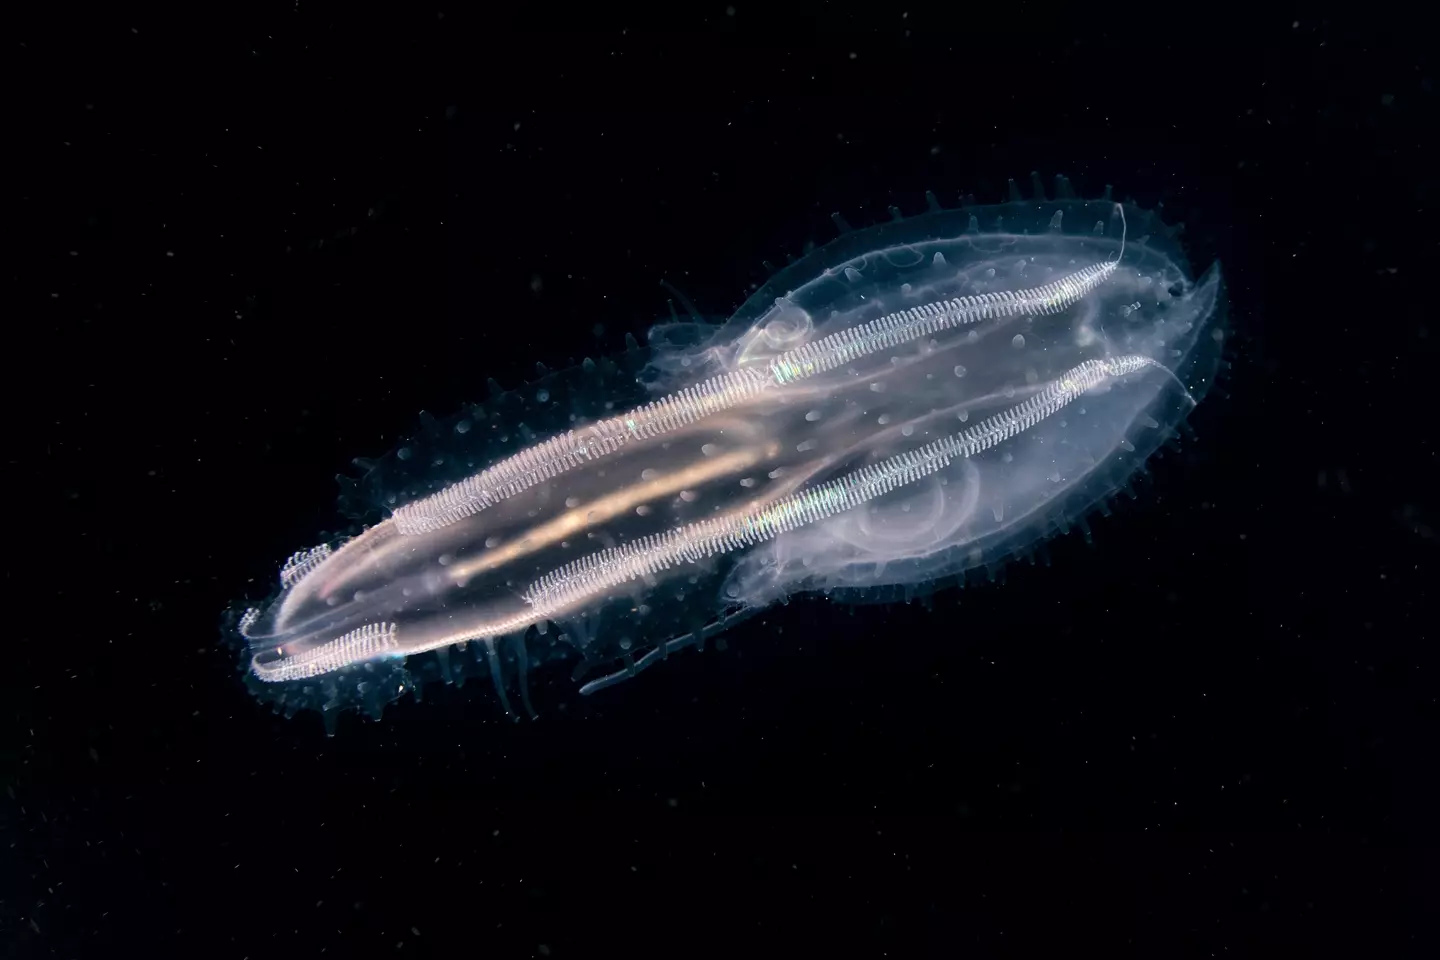 A transluscent comb jelly in West Papua, Indonesia.